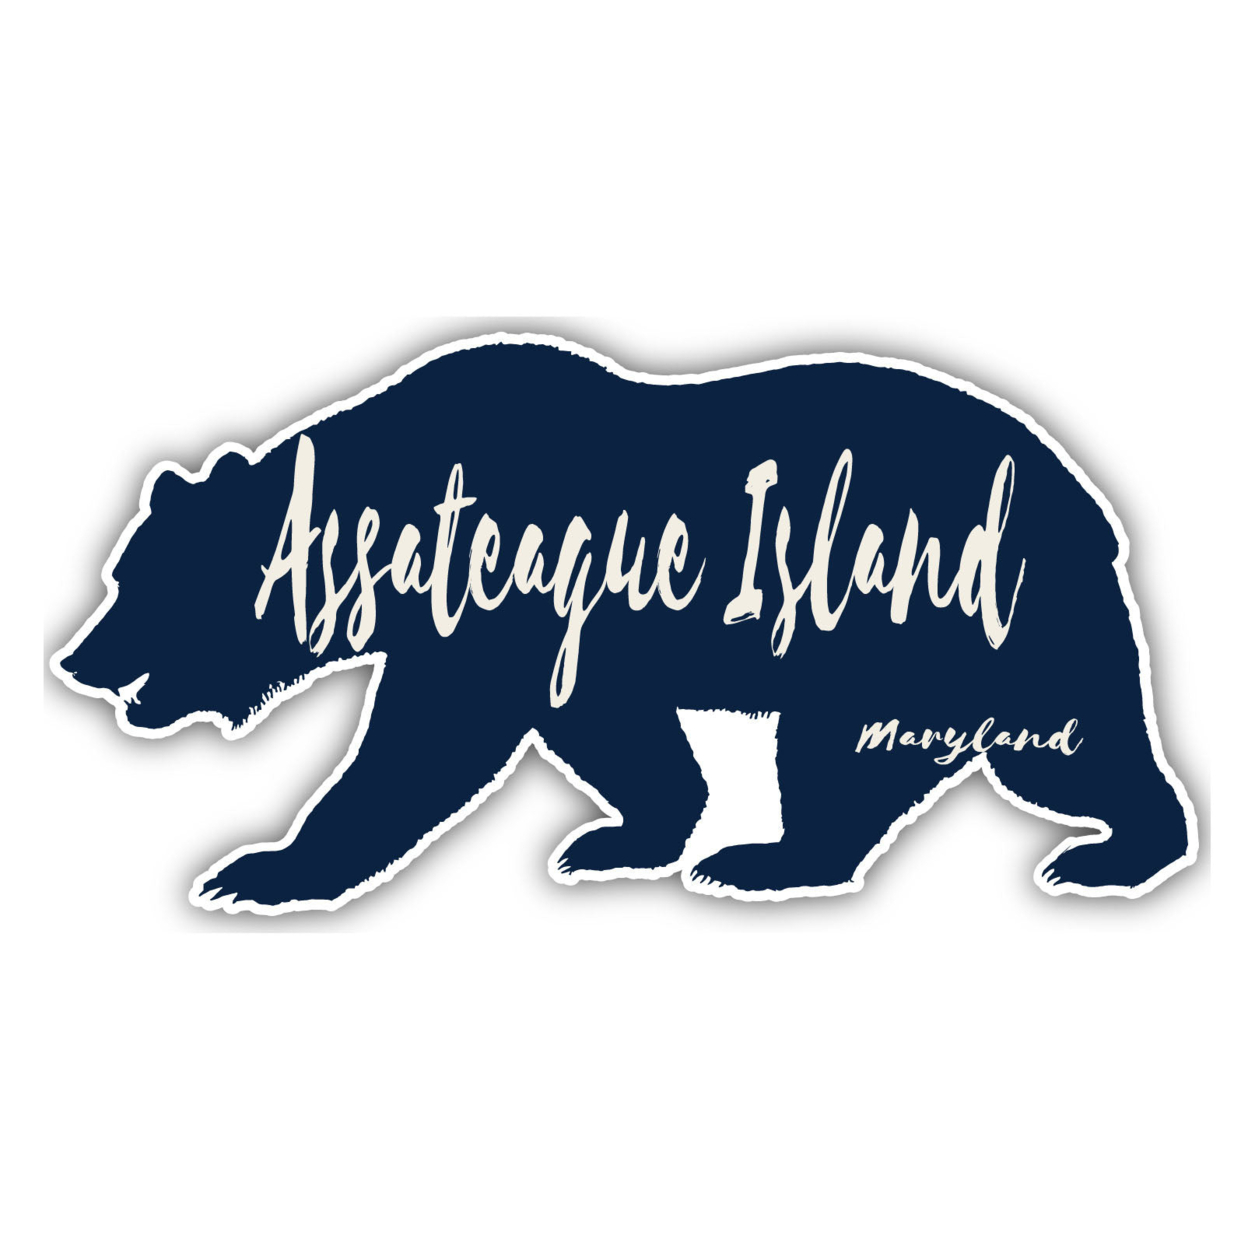 Assateague Island Maryland Souvenir Decorative Stickers (Choose Theme And Size) - 4-Pack, 10-Inch, Bear